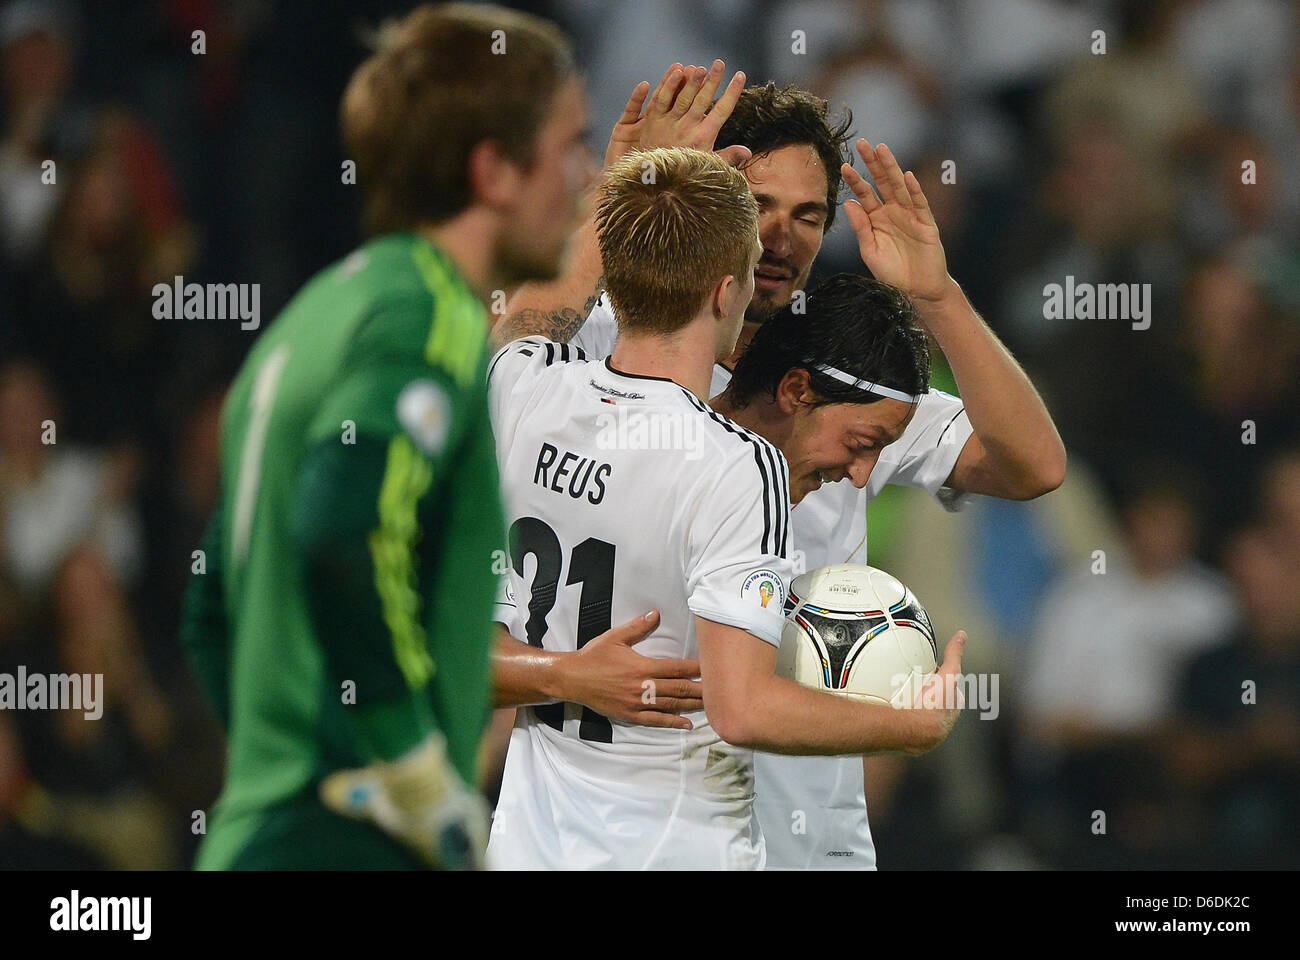 Germany's Mesut Oezil (R) celebrates after scoring the goal 2-0 with team mates Germany's Mats Hummels (2nd R) and Germany's Marco Reus (2nd L) during the Group C World Cup 2014 qualifying match between Germany and Faroe Islands at AWD Arena in Hanover, Germany, 07 September 2012. Photo: Marcus Brandt dpa/lno  +++(c) dpa - Bildfunk+++ Stock Photo